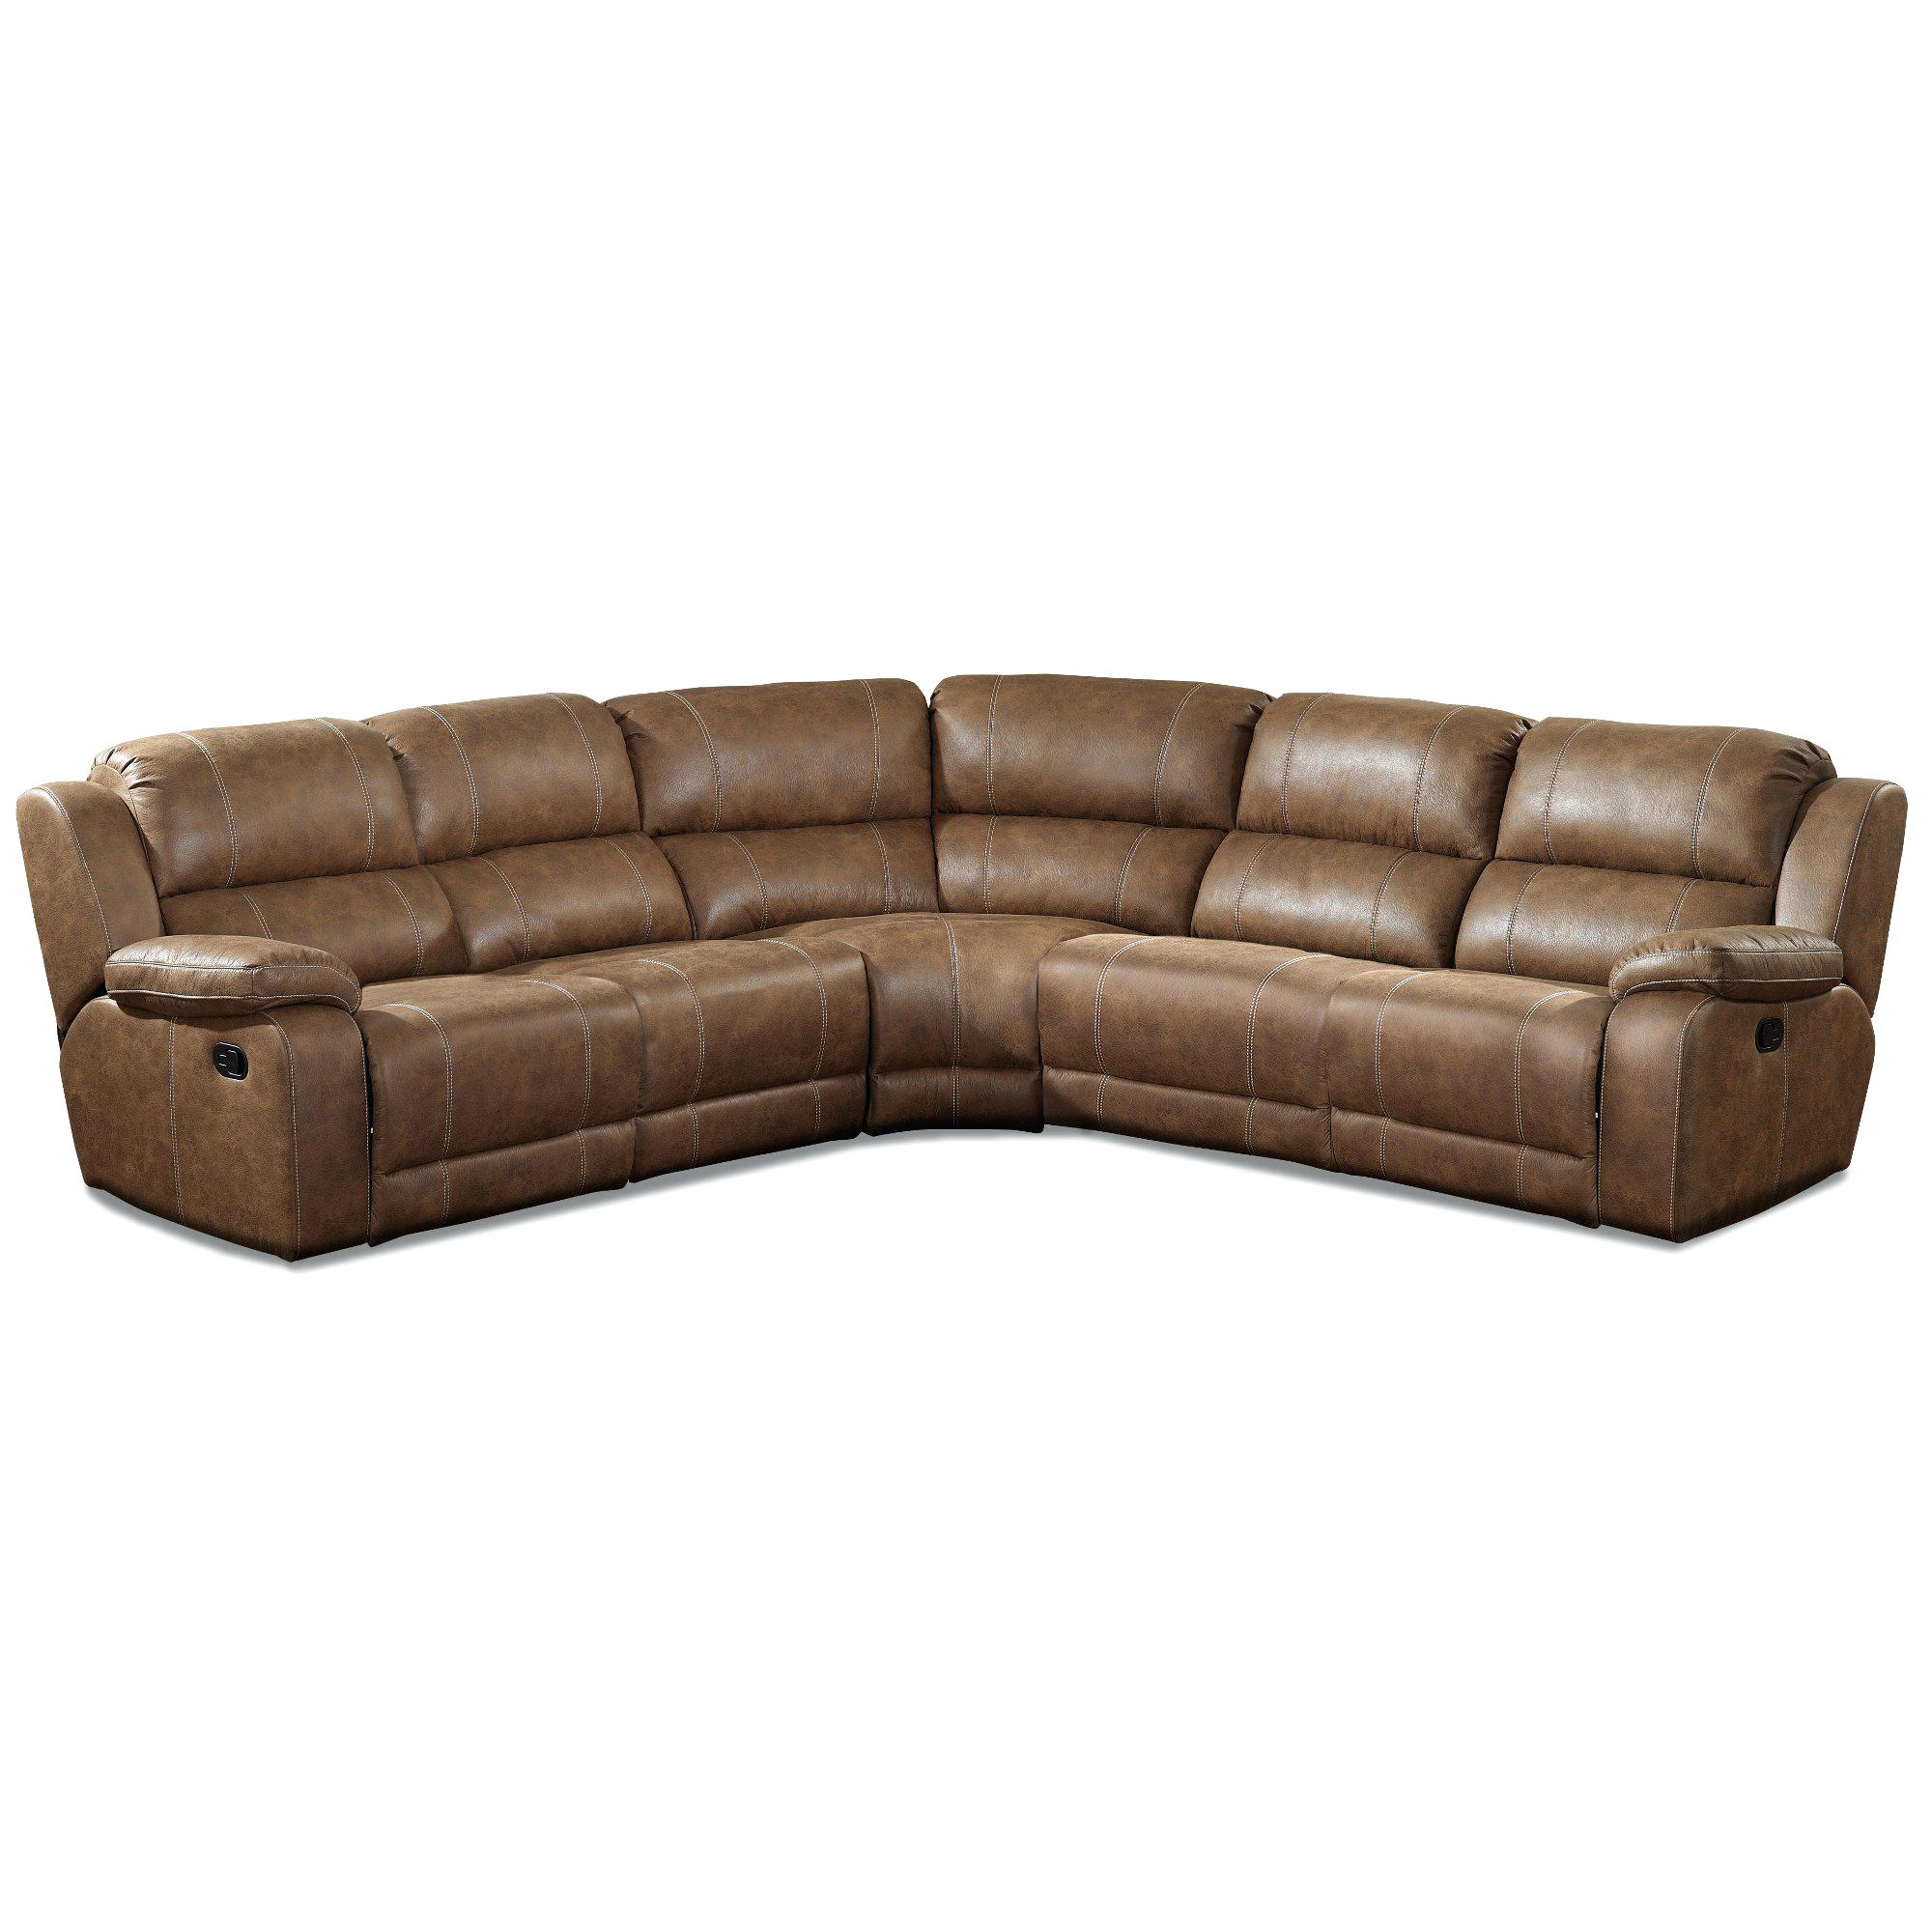 leather sectional sofa chaise recliner photo - 3